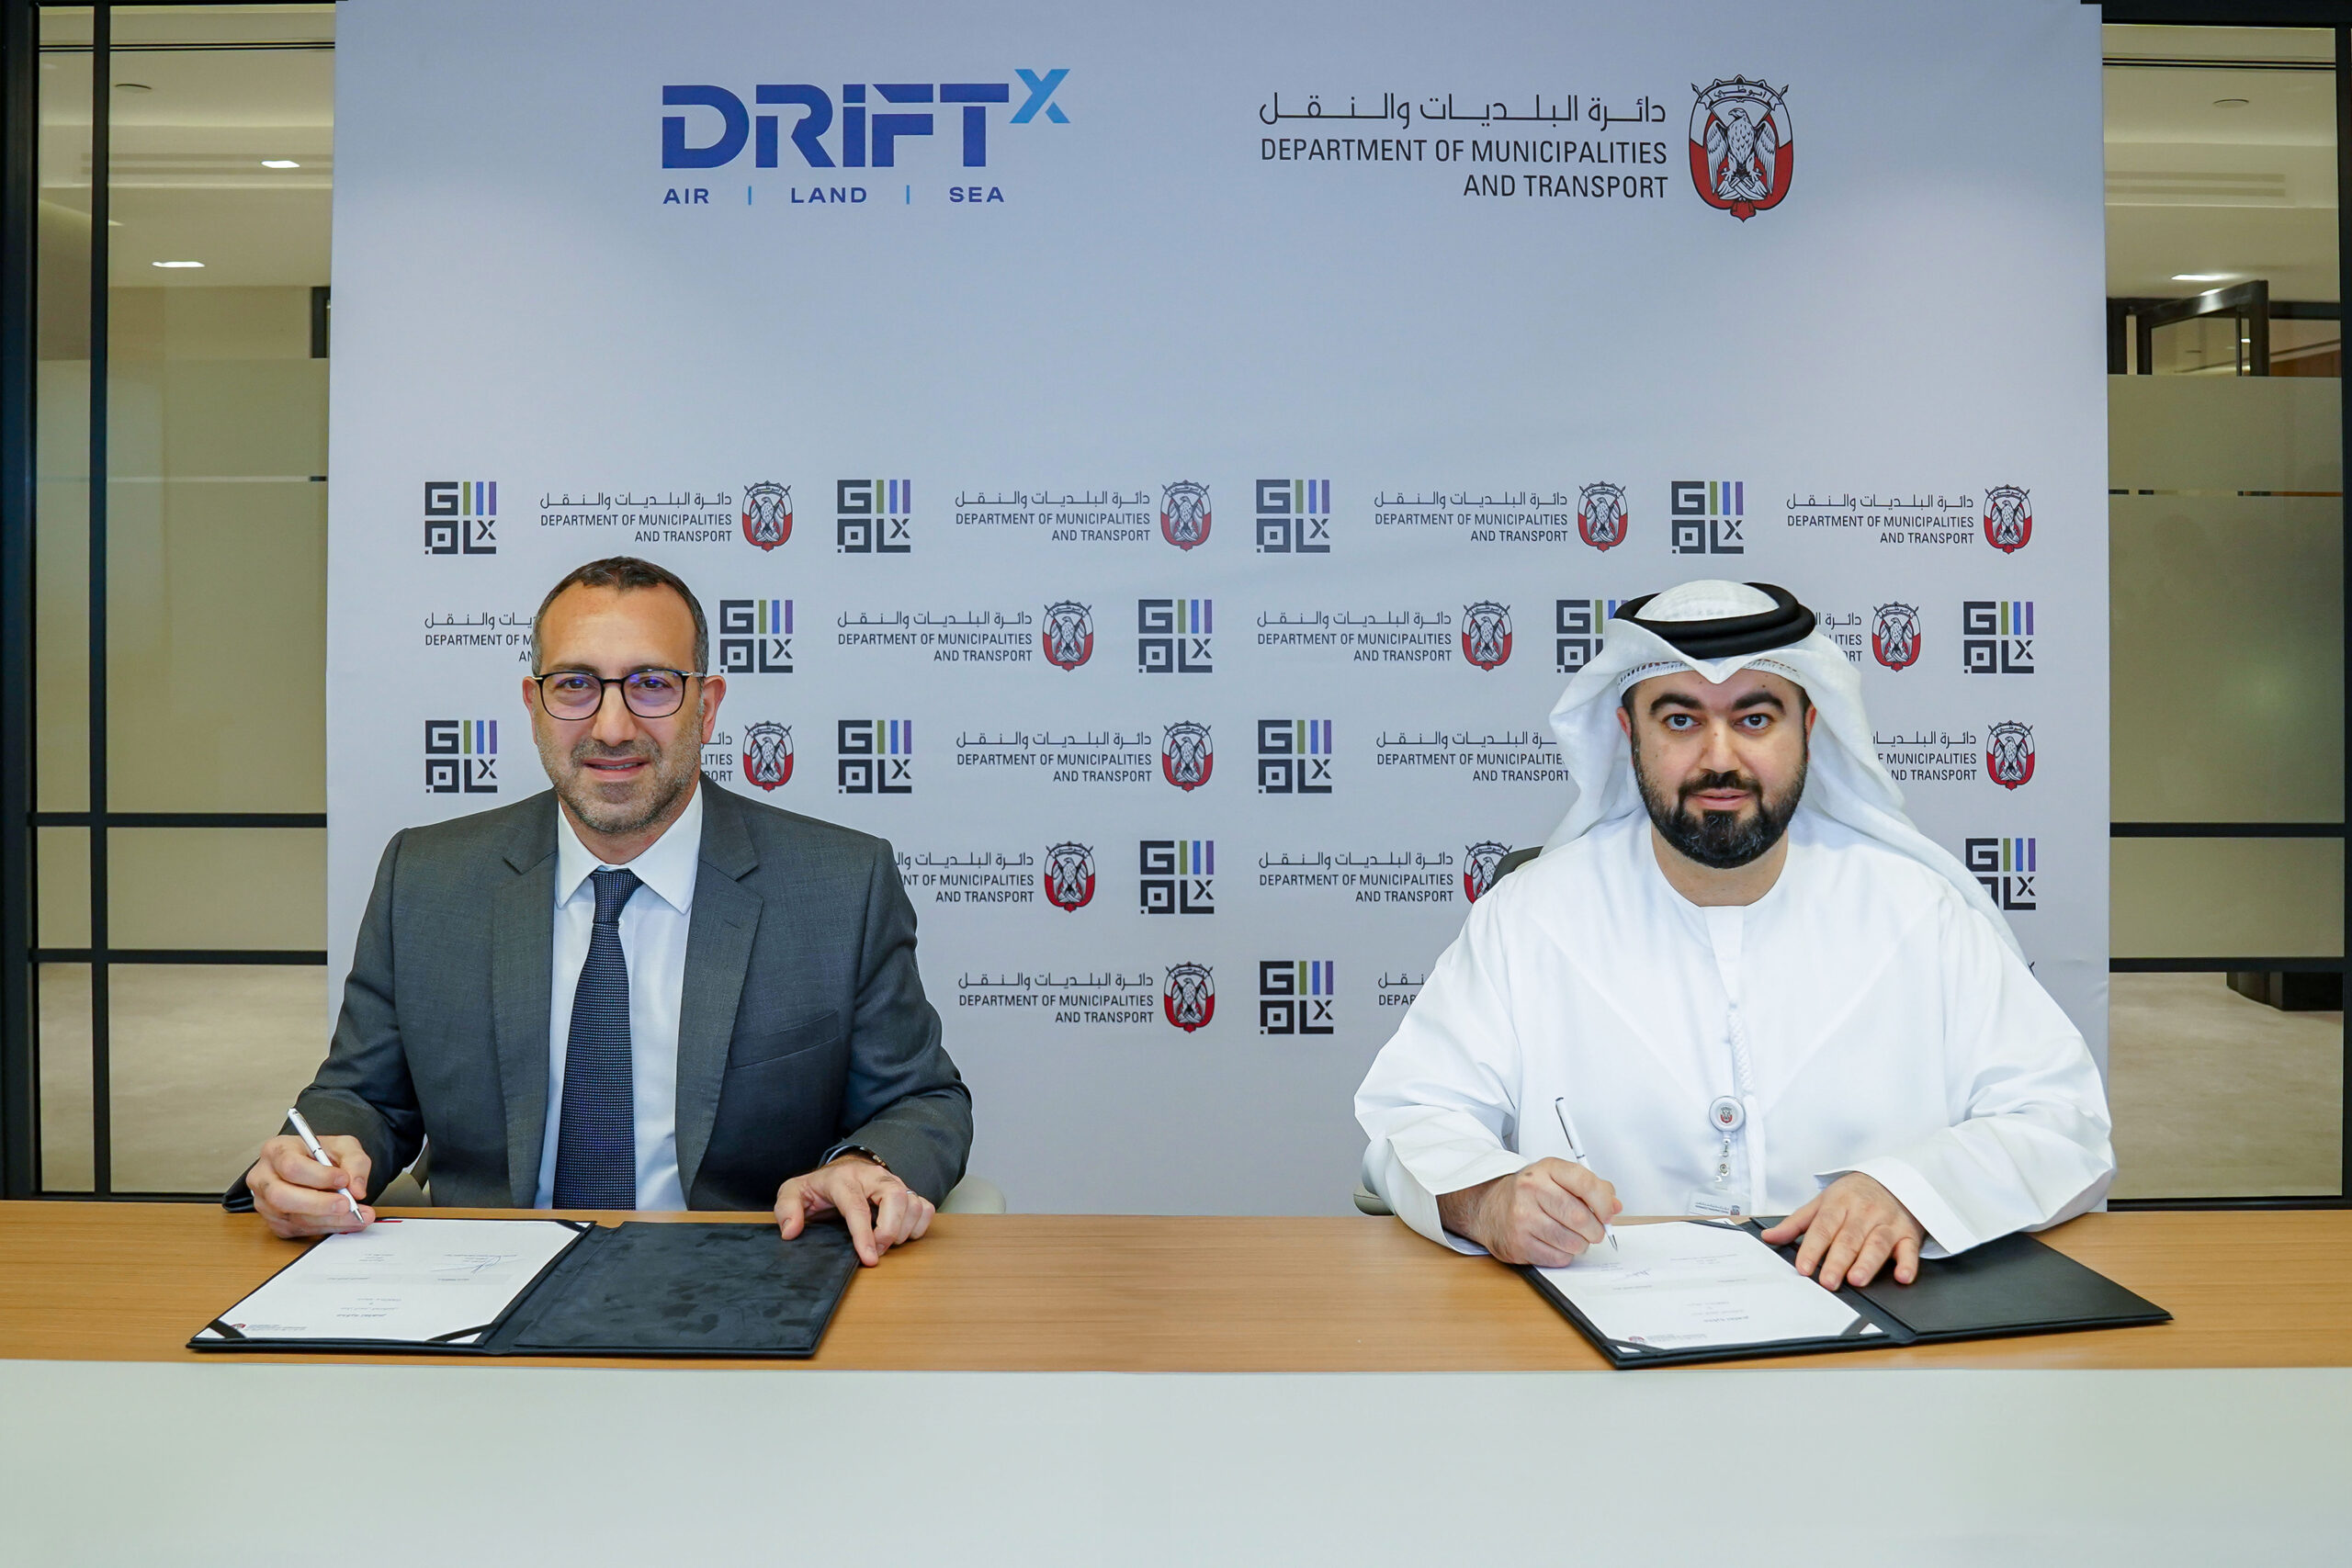 DMT and DRIFTx to Unite Urban Mobility Leaders and Innovators in Abu Dhabi